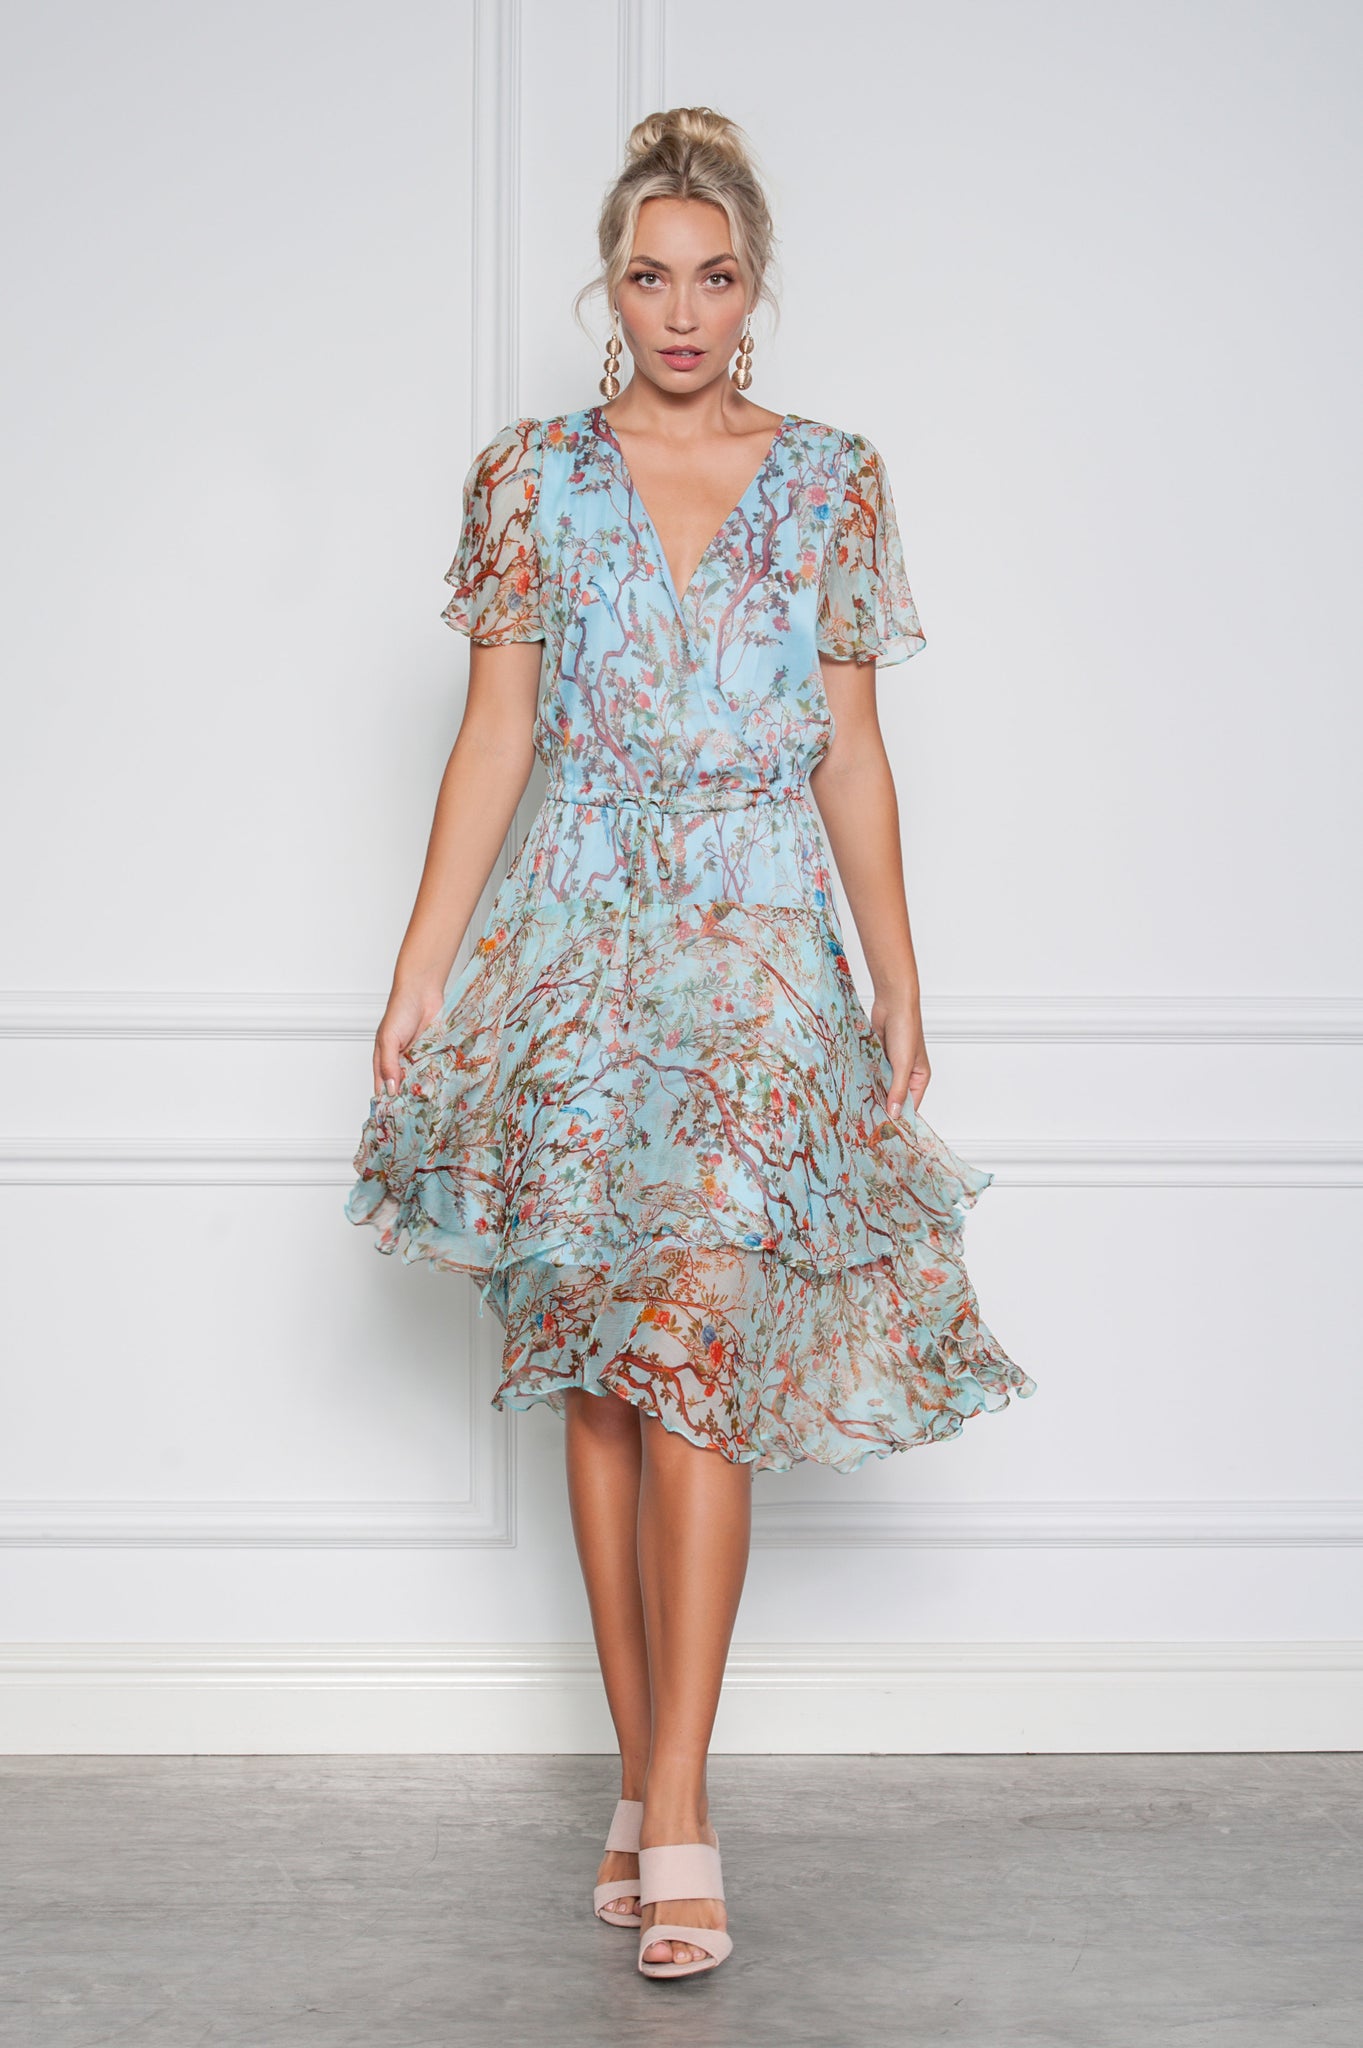 Buy Kamare Collective Divinia Dress in Bluebird now at Smoke and Mirrors Boutique. Buy Kamare Divinia Dress with ZipPay. Buy Kamare Divinia Dress now with AfterPay. Buy Kamare with Free Shipping Australia wide on all orders over $100. 